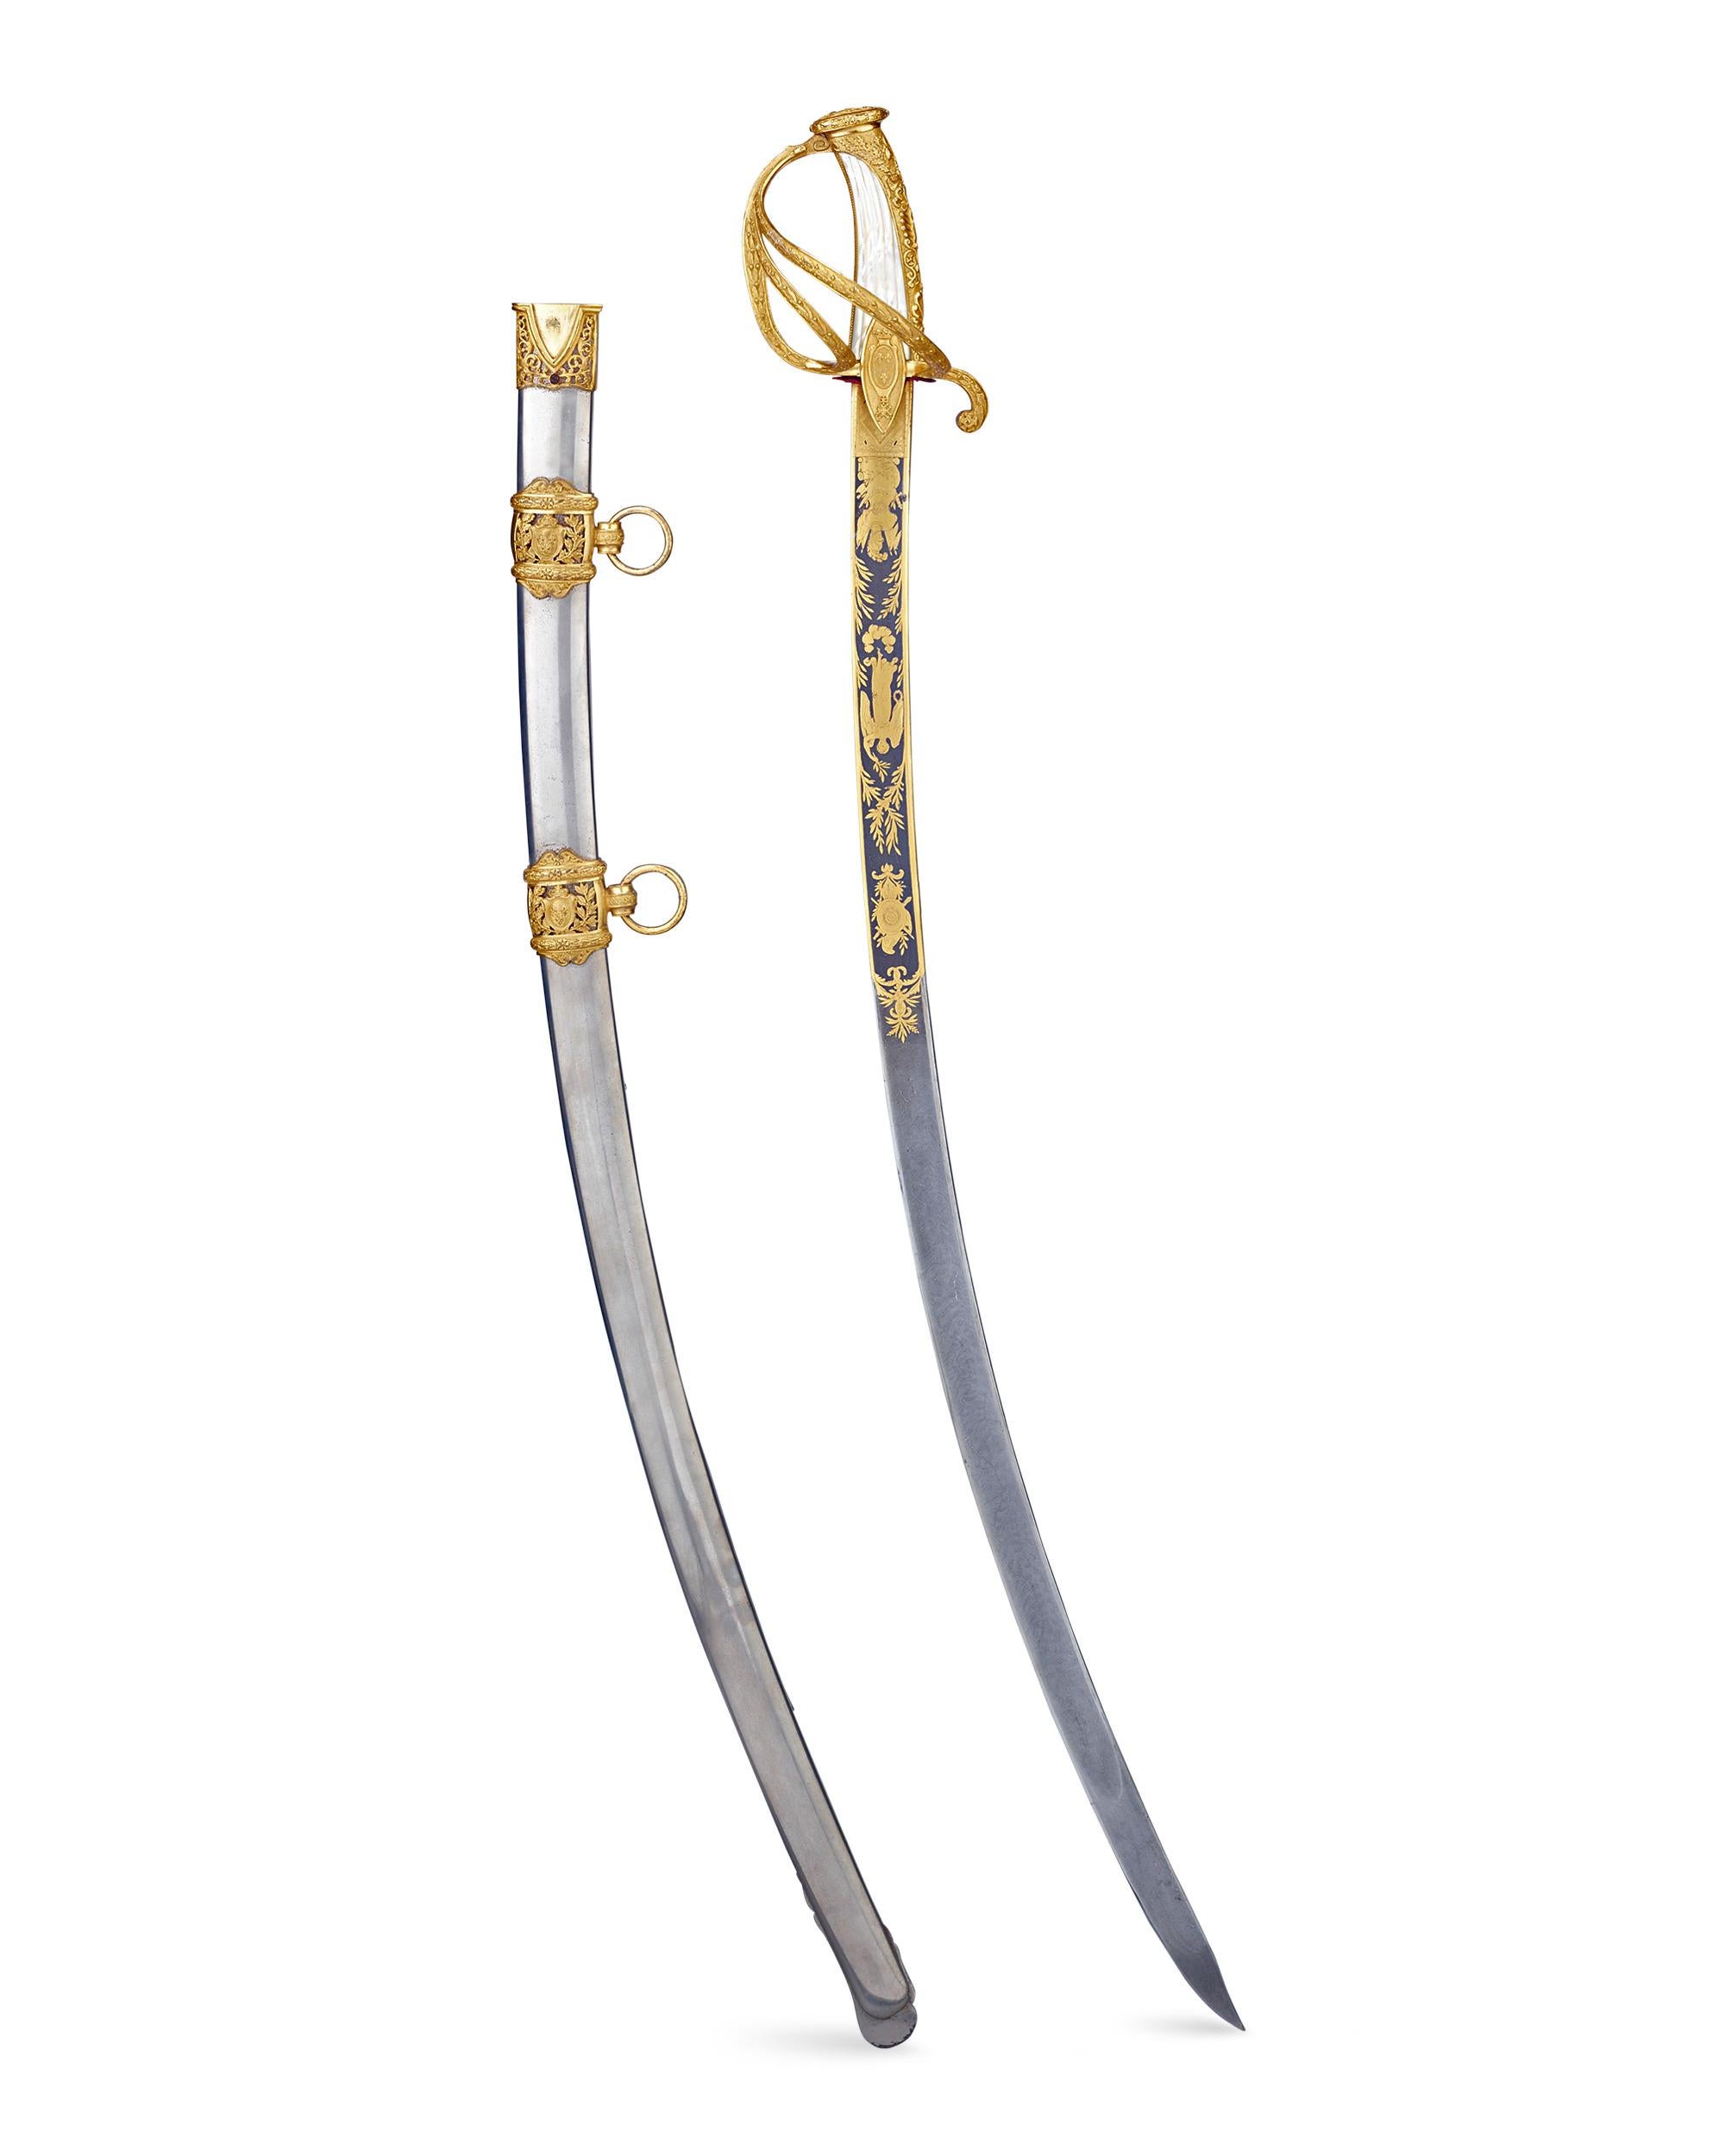 This exquisite sabre was created for and owned by the son of the French King Charles X, known as Charles Ferdinand, the Duke of Berry and Prince of France. It was made by the noted swordmaker Jean-Georges Bick, considered one of the finest craftsmen